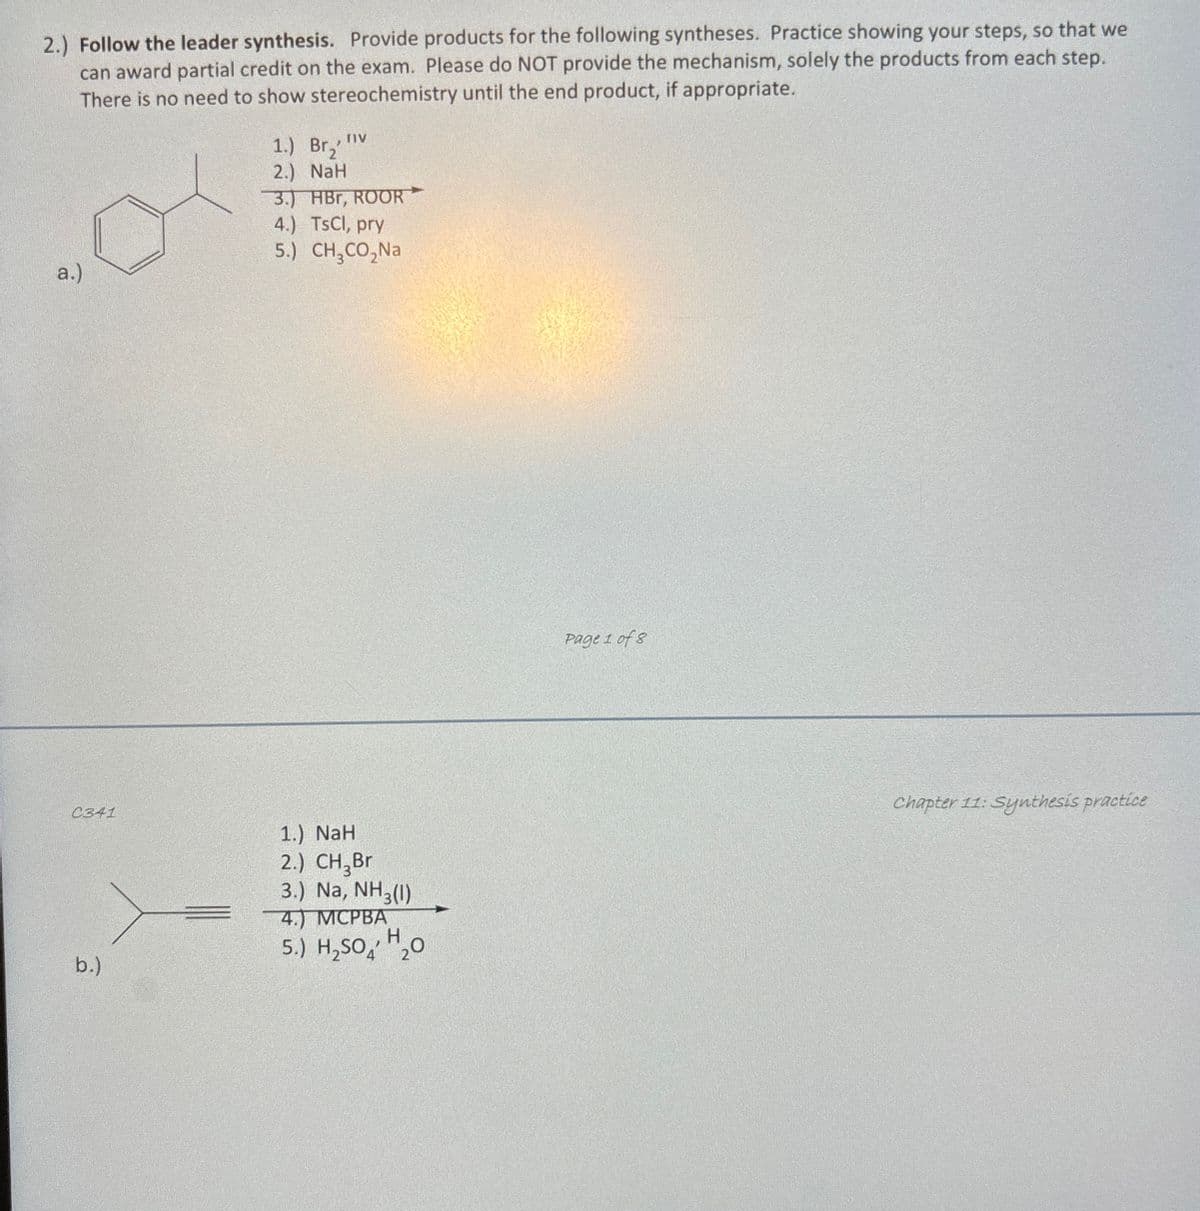 2.) Follow the leader synthesis. Provide products for the following syntheses. Practice showing your steps, so that we
can award partial credit on the exam. Please do NOT provide the mechanism, solely the products from each step.
There is no need to show stereochemistry until the end product, if appropriate.
1.) Br₂"
2.) NaH
3.) HBr, ROOR
4.) TsCl, pry
5.) CH₂CO₂Na
a.)
C341
b.)
1.) NaH
2.) CH₂Br
3.) Na, NH3(1)
4.) MCPBA
H
5.) H₂SO 20
Page 1 of 8
Chapter 11: Synthesis practice